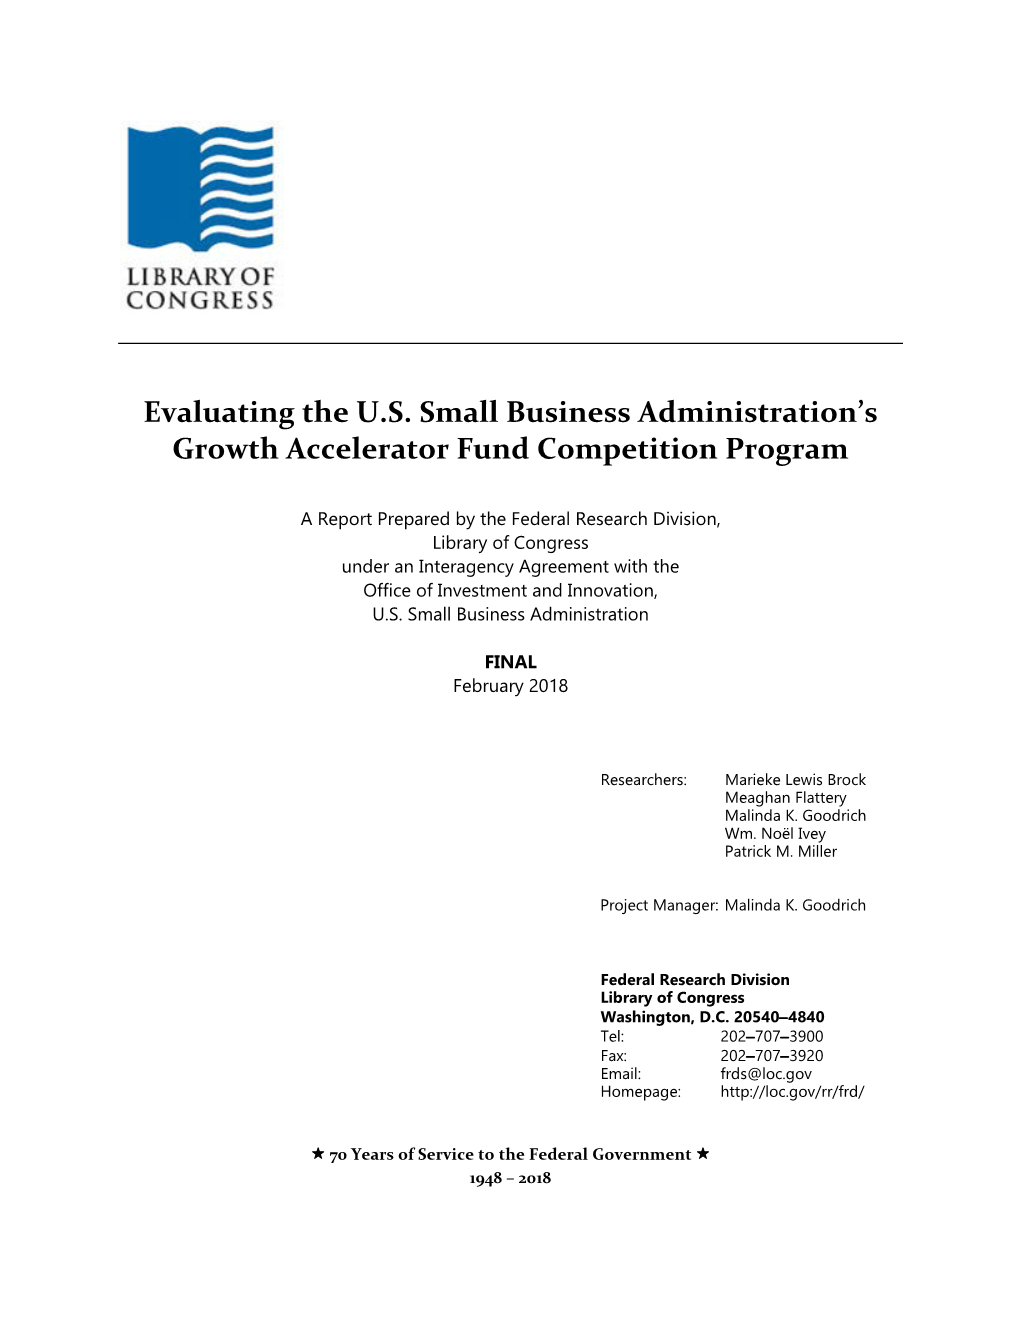 Evaluating the U.S. Small Business Administration's Growth Accelerator